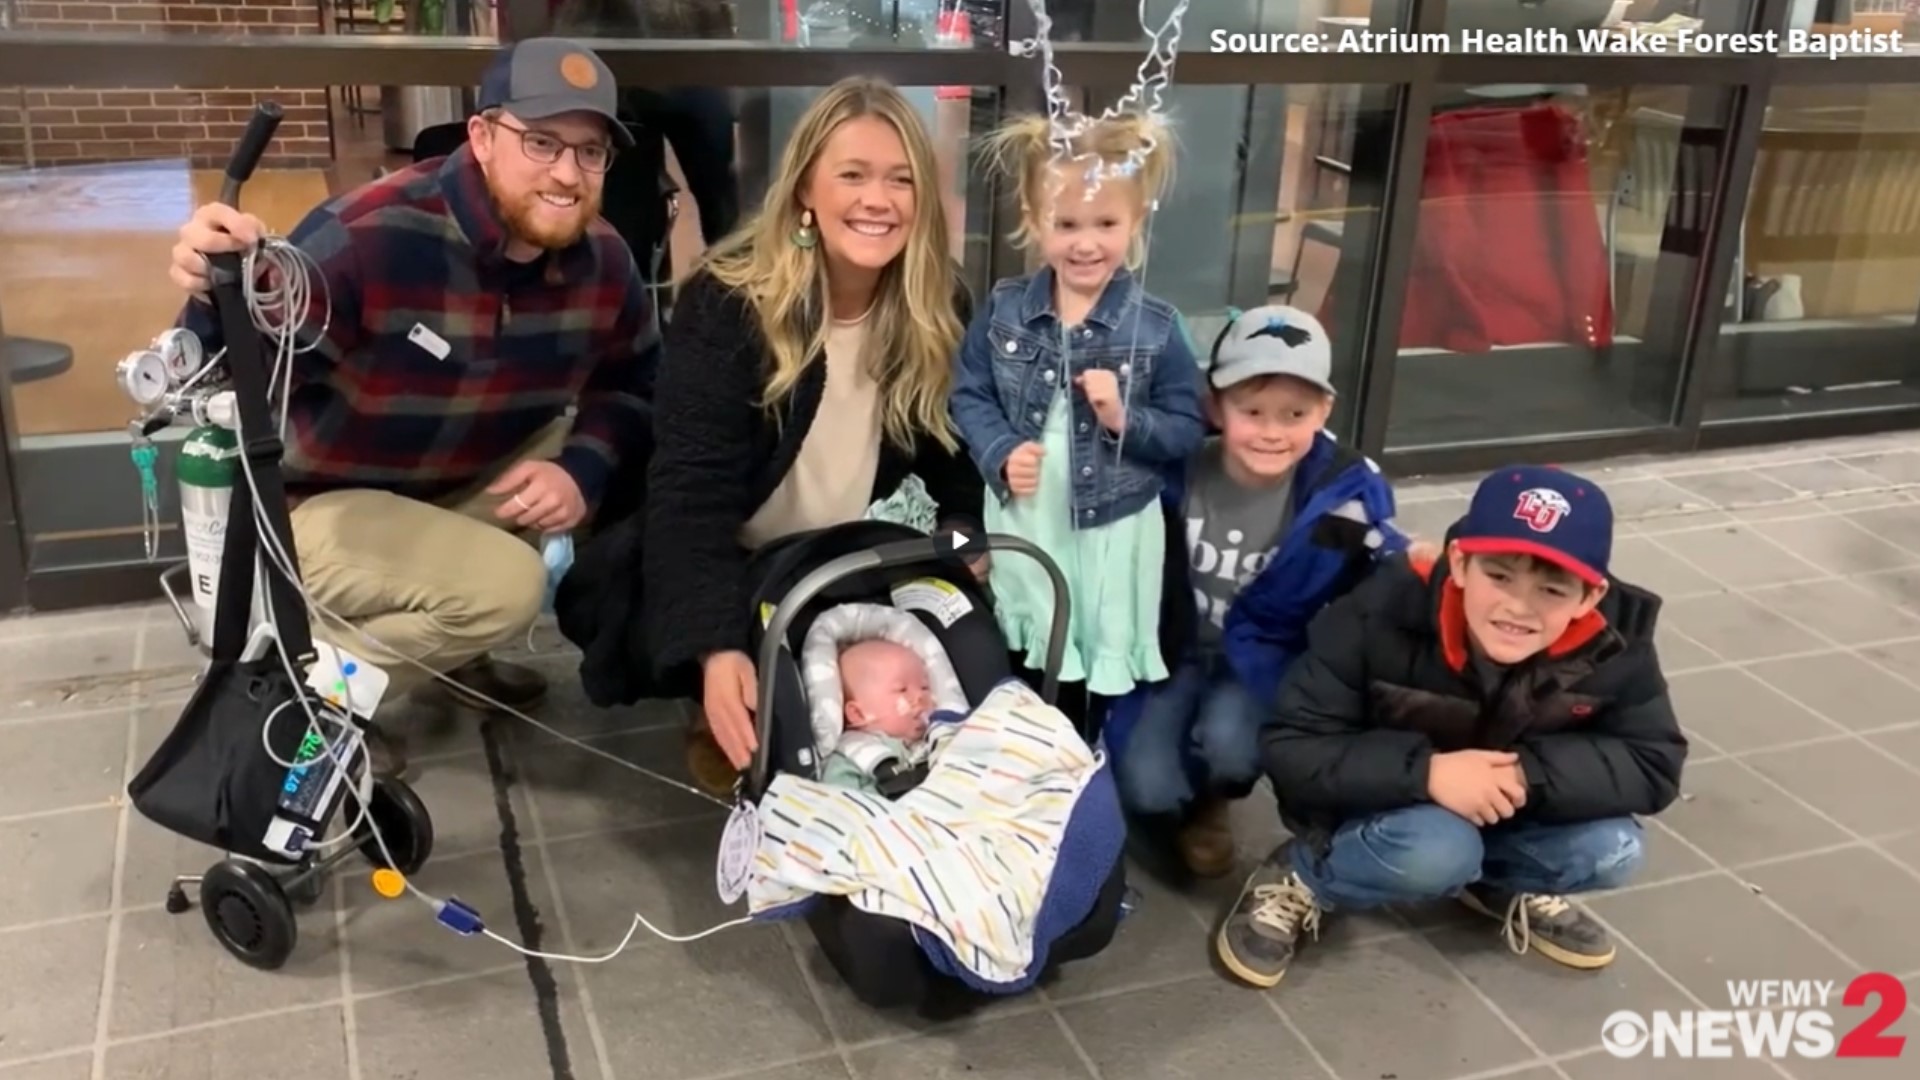 Amy and Nathan Duncan waited months for their new son to come home after he was born. Before that, they'd been waiting years, hoping for the chance to adopt a baby.